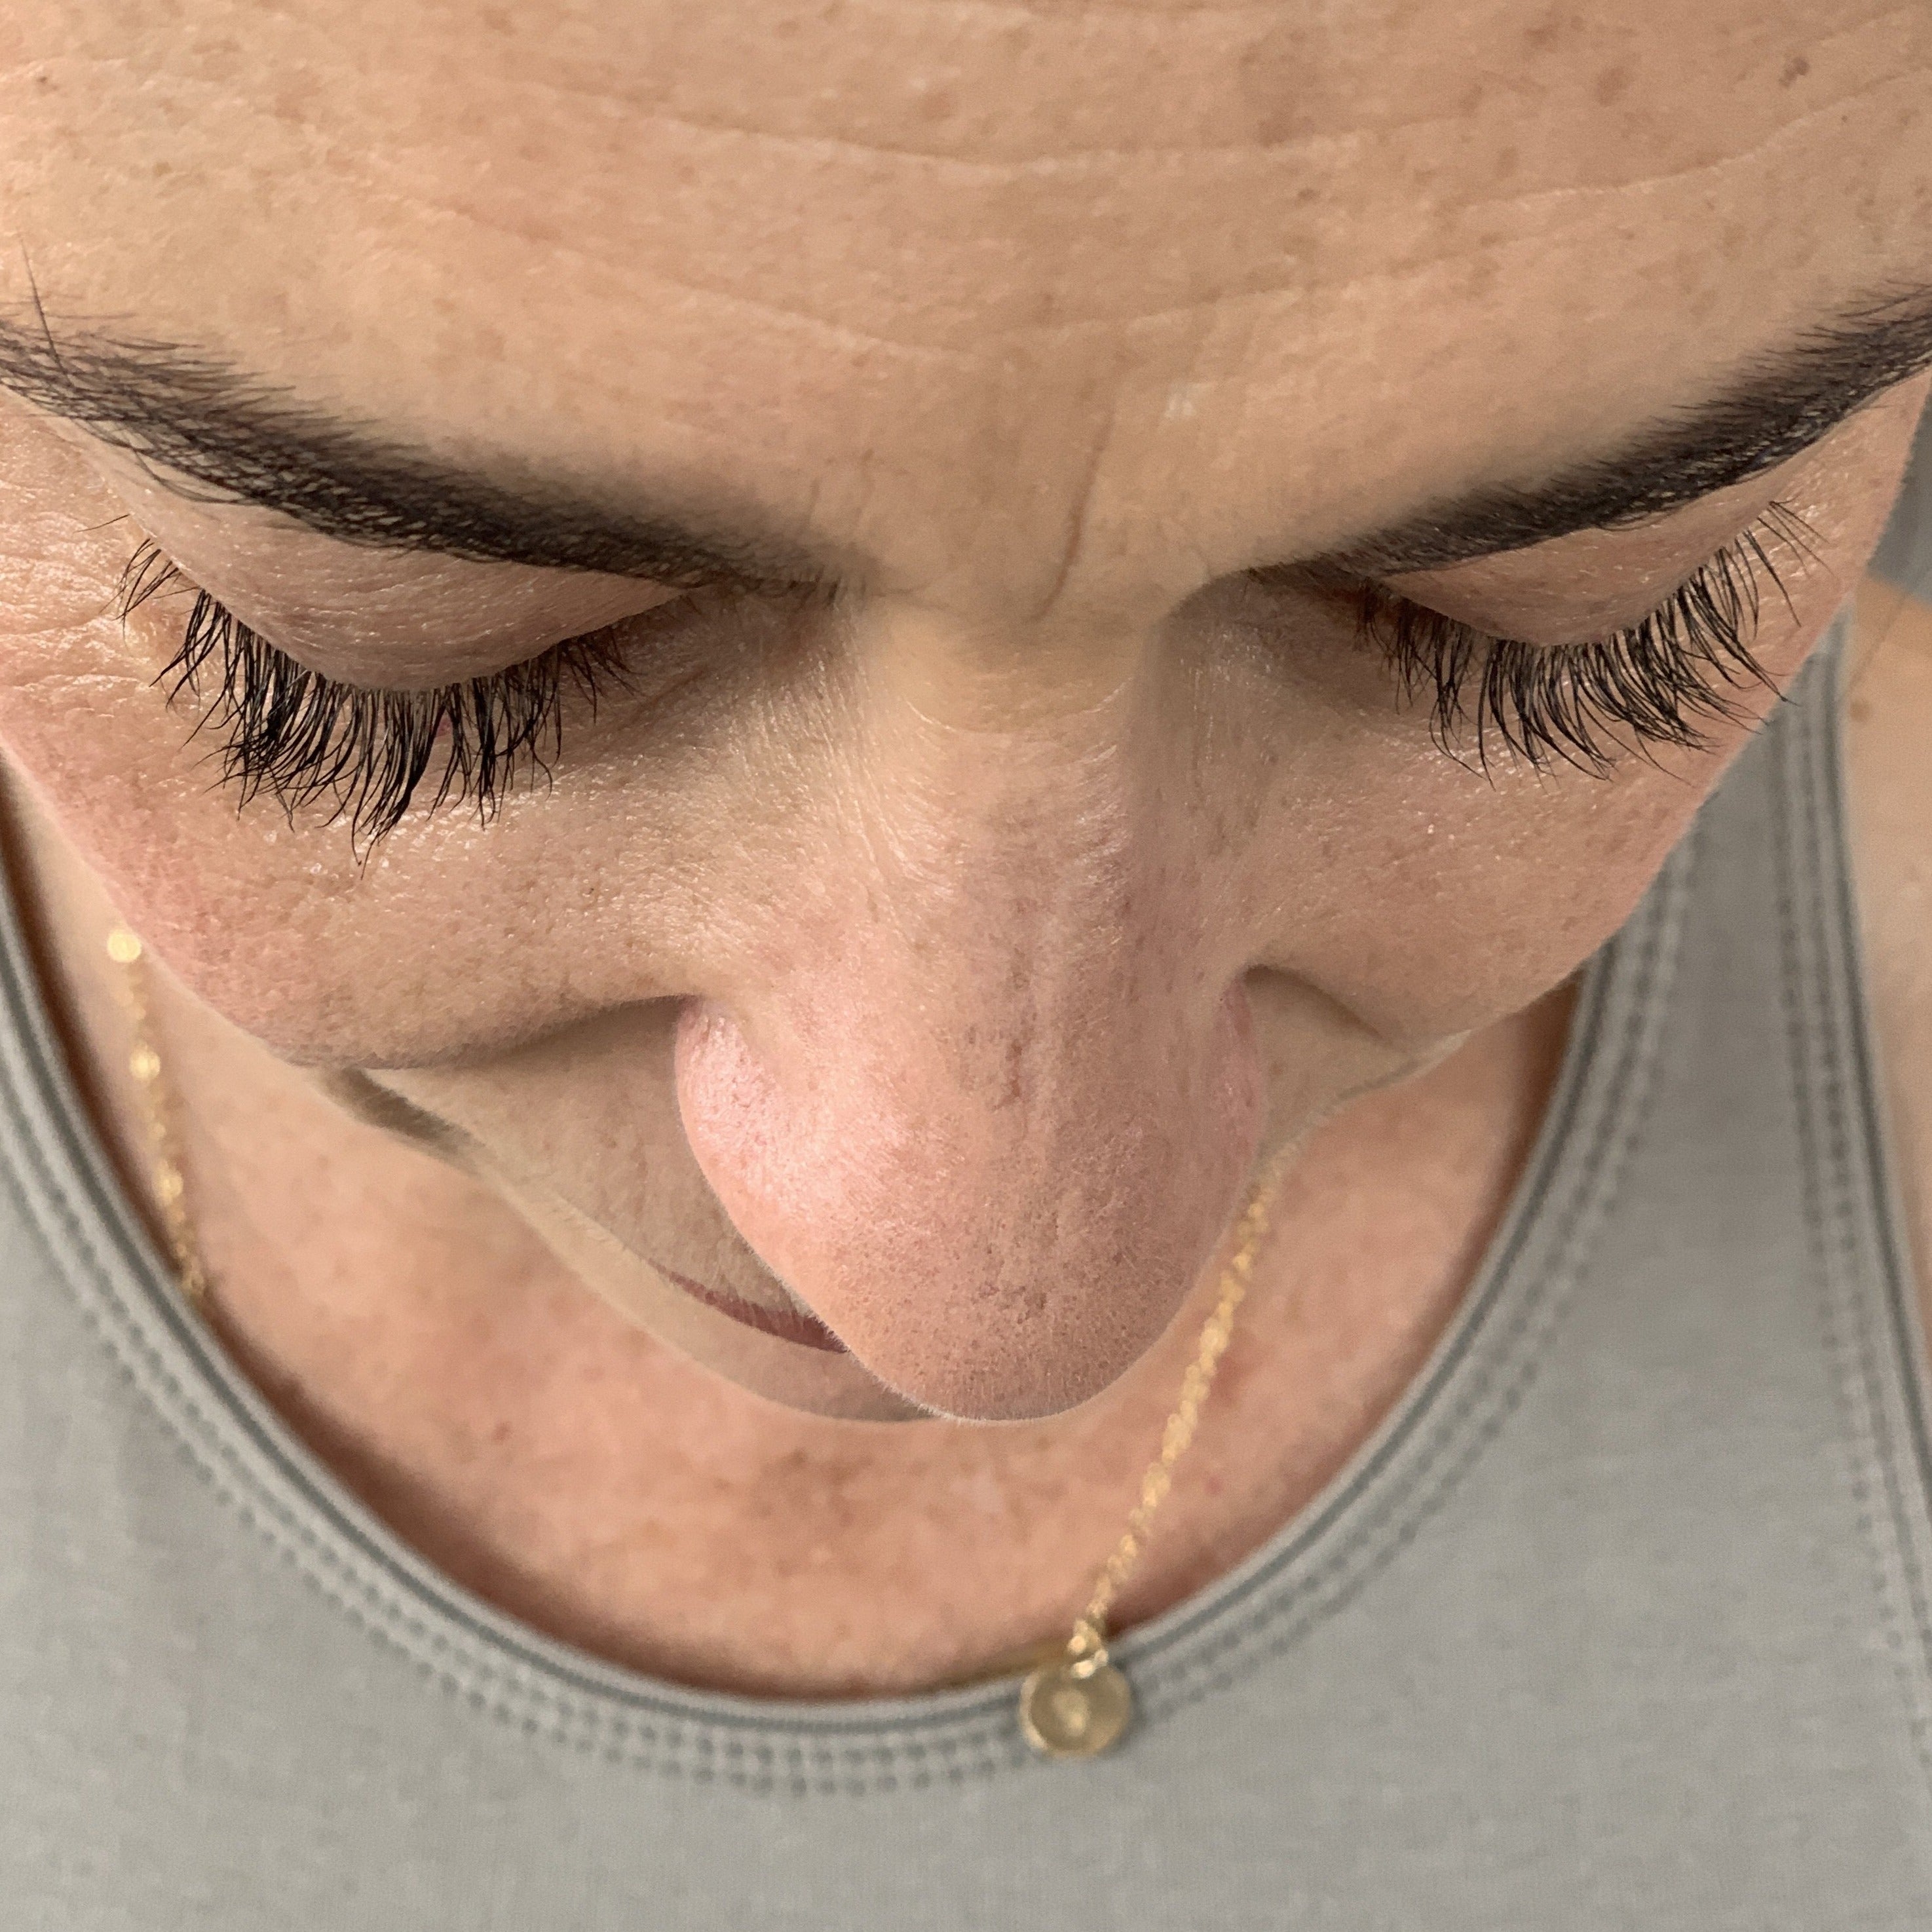 customers long eyelashes after using Purely Lashes growth serum